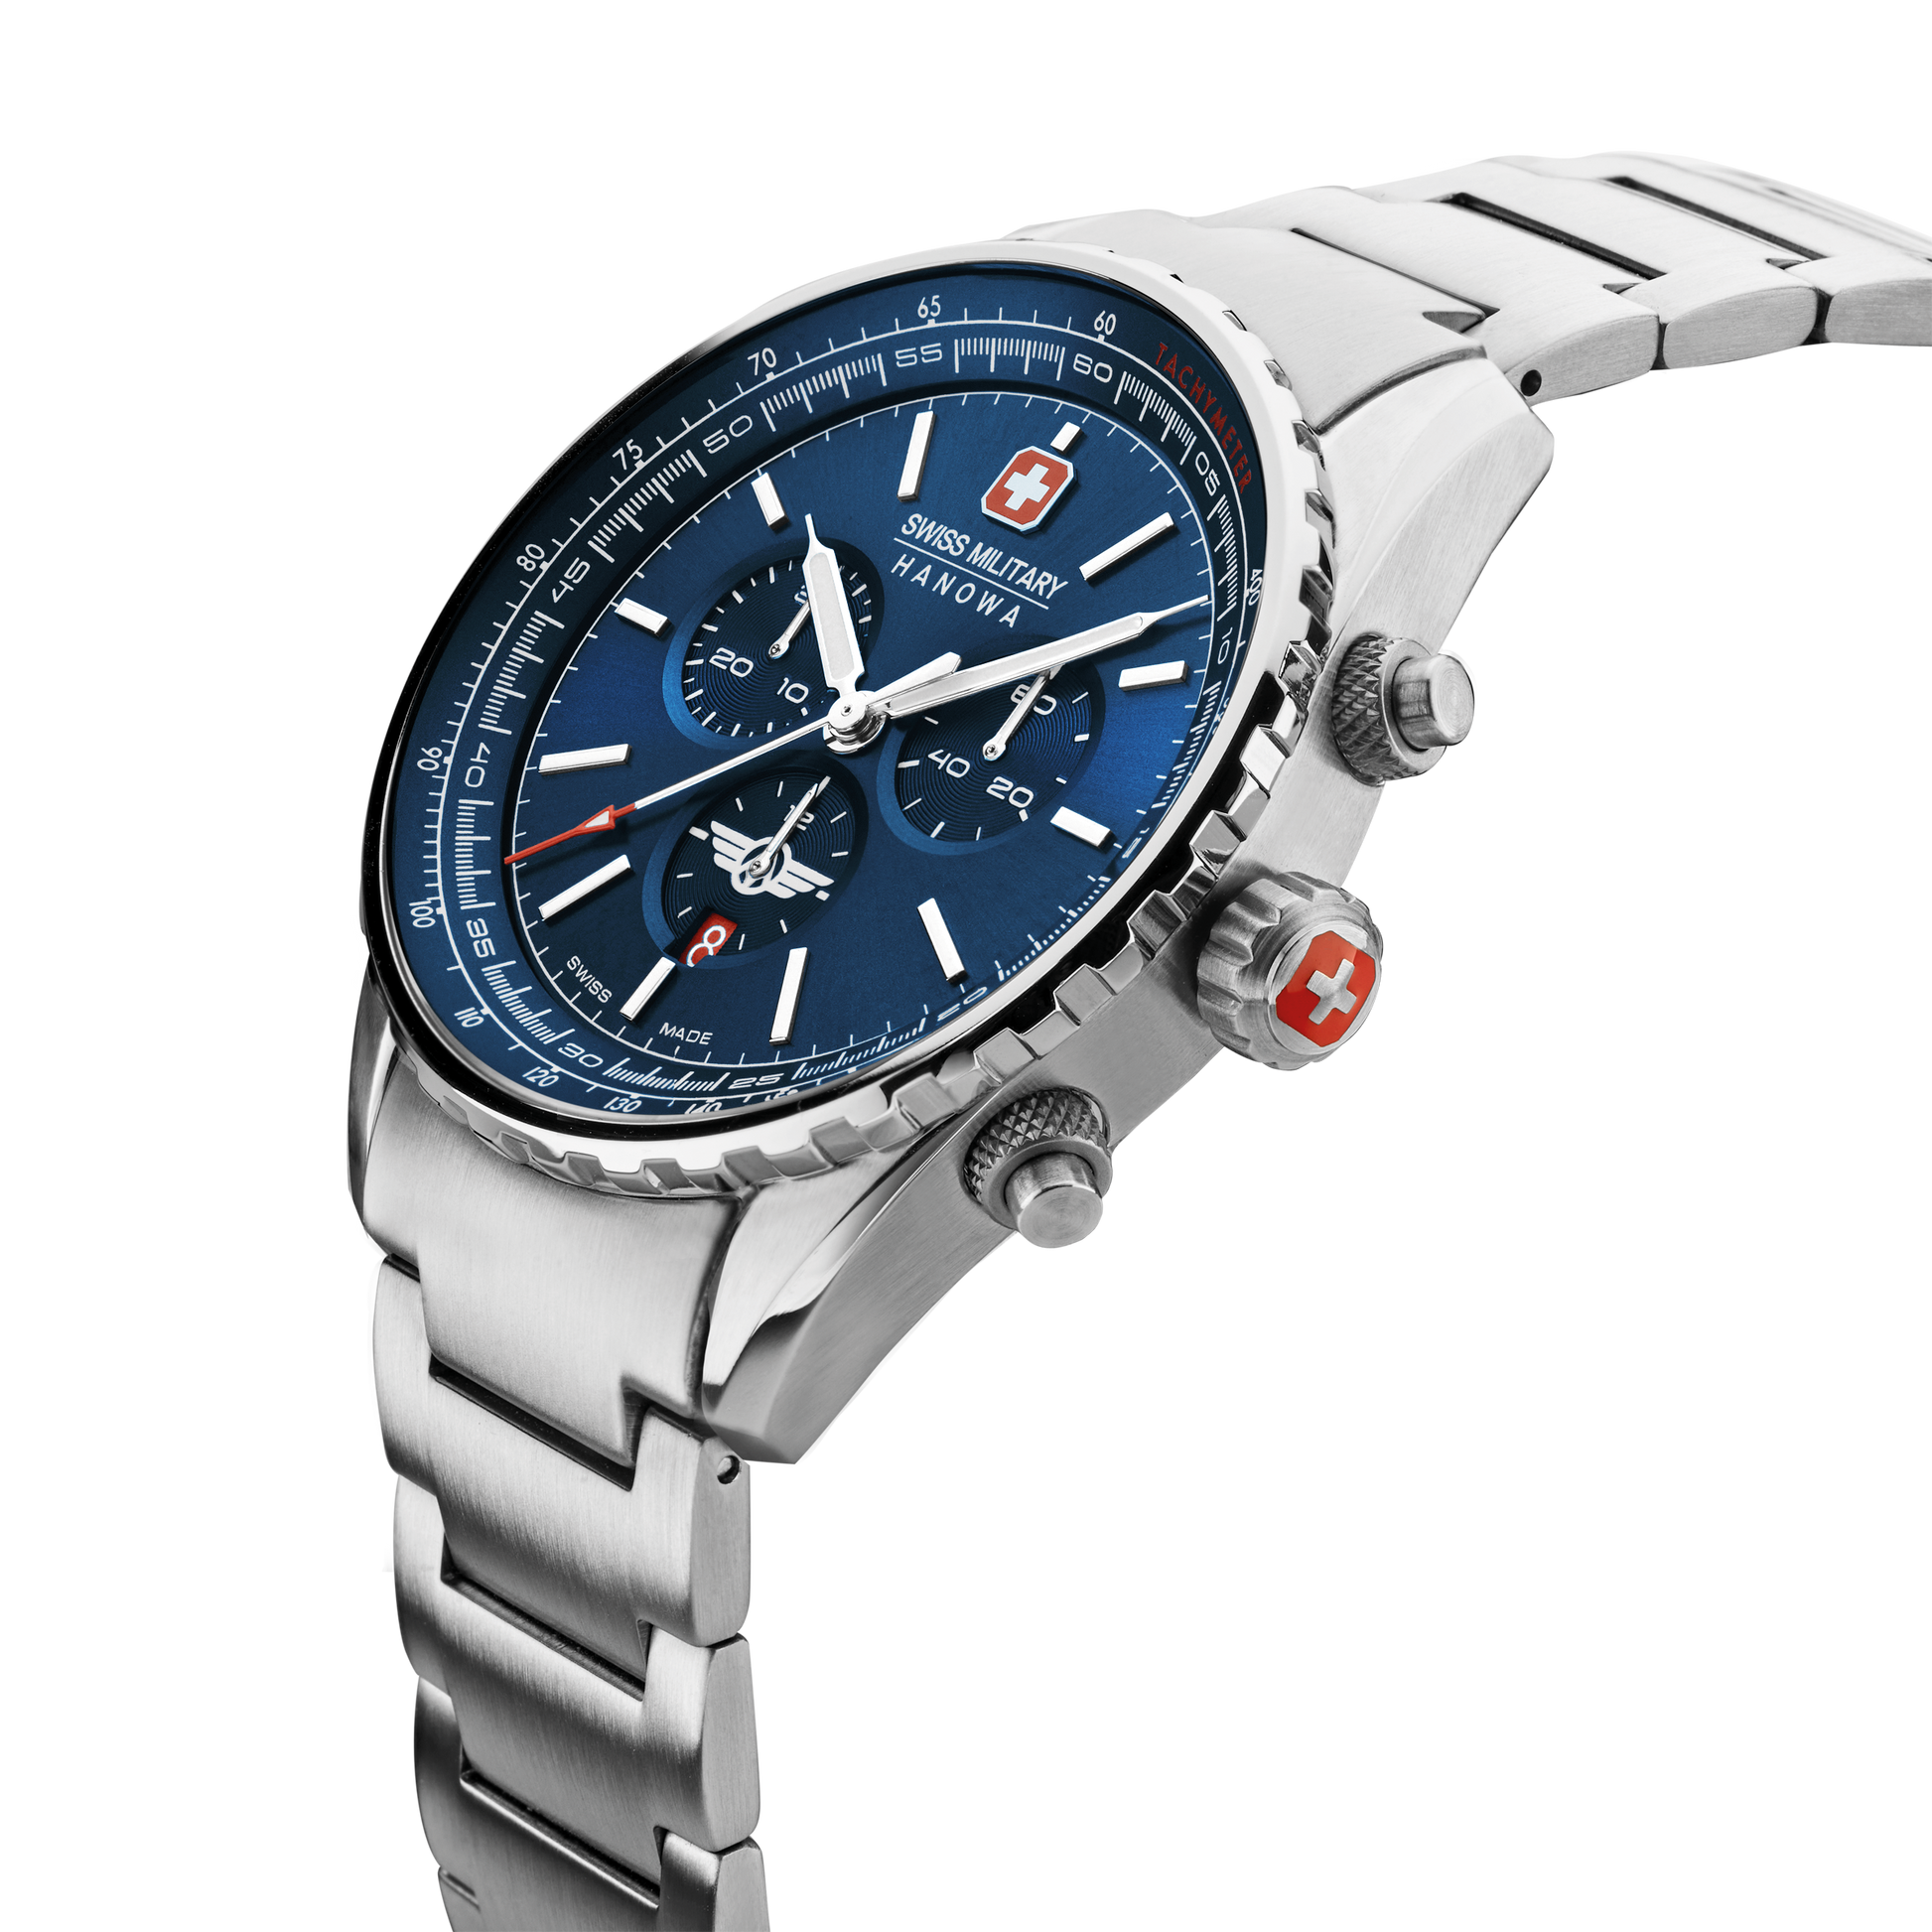 Swiss Military Hanowa Afterburn Chrono. Stainless steel case. Blue dial, Stainless steel bracelet. Side image.